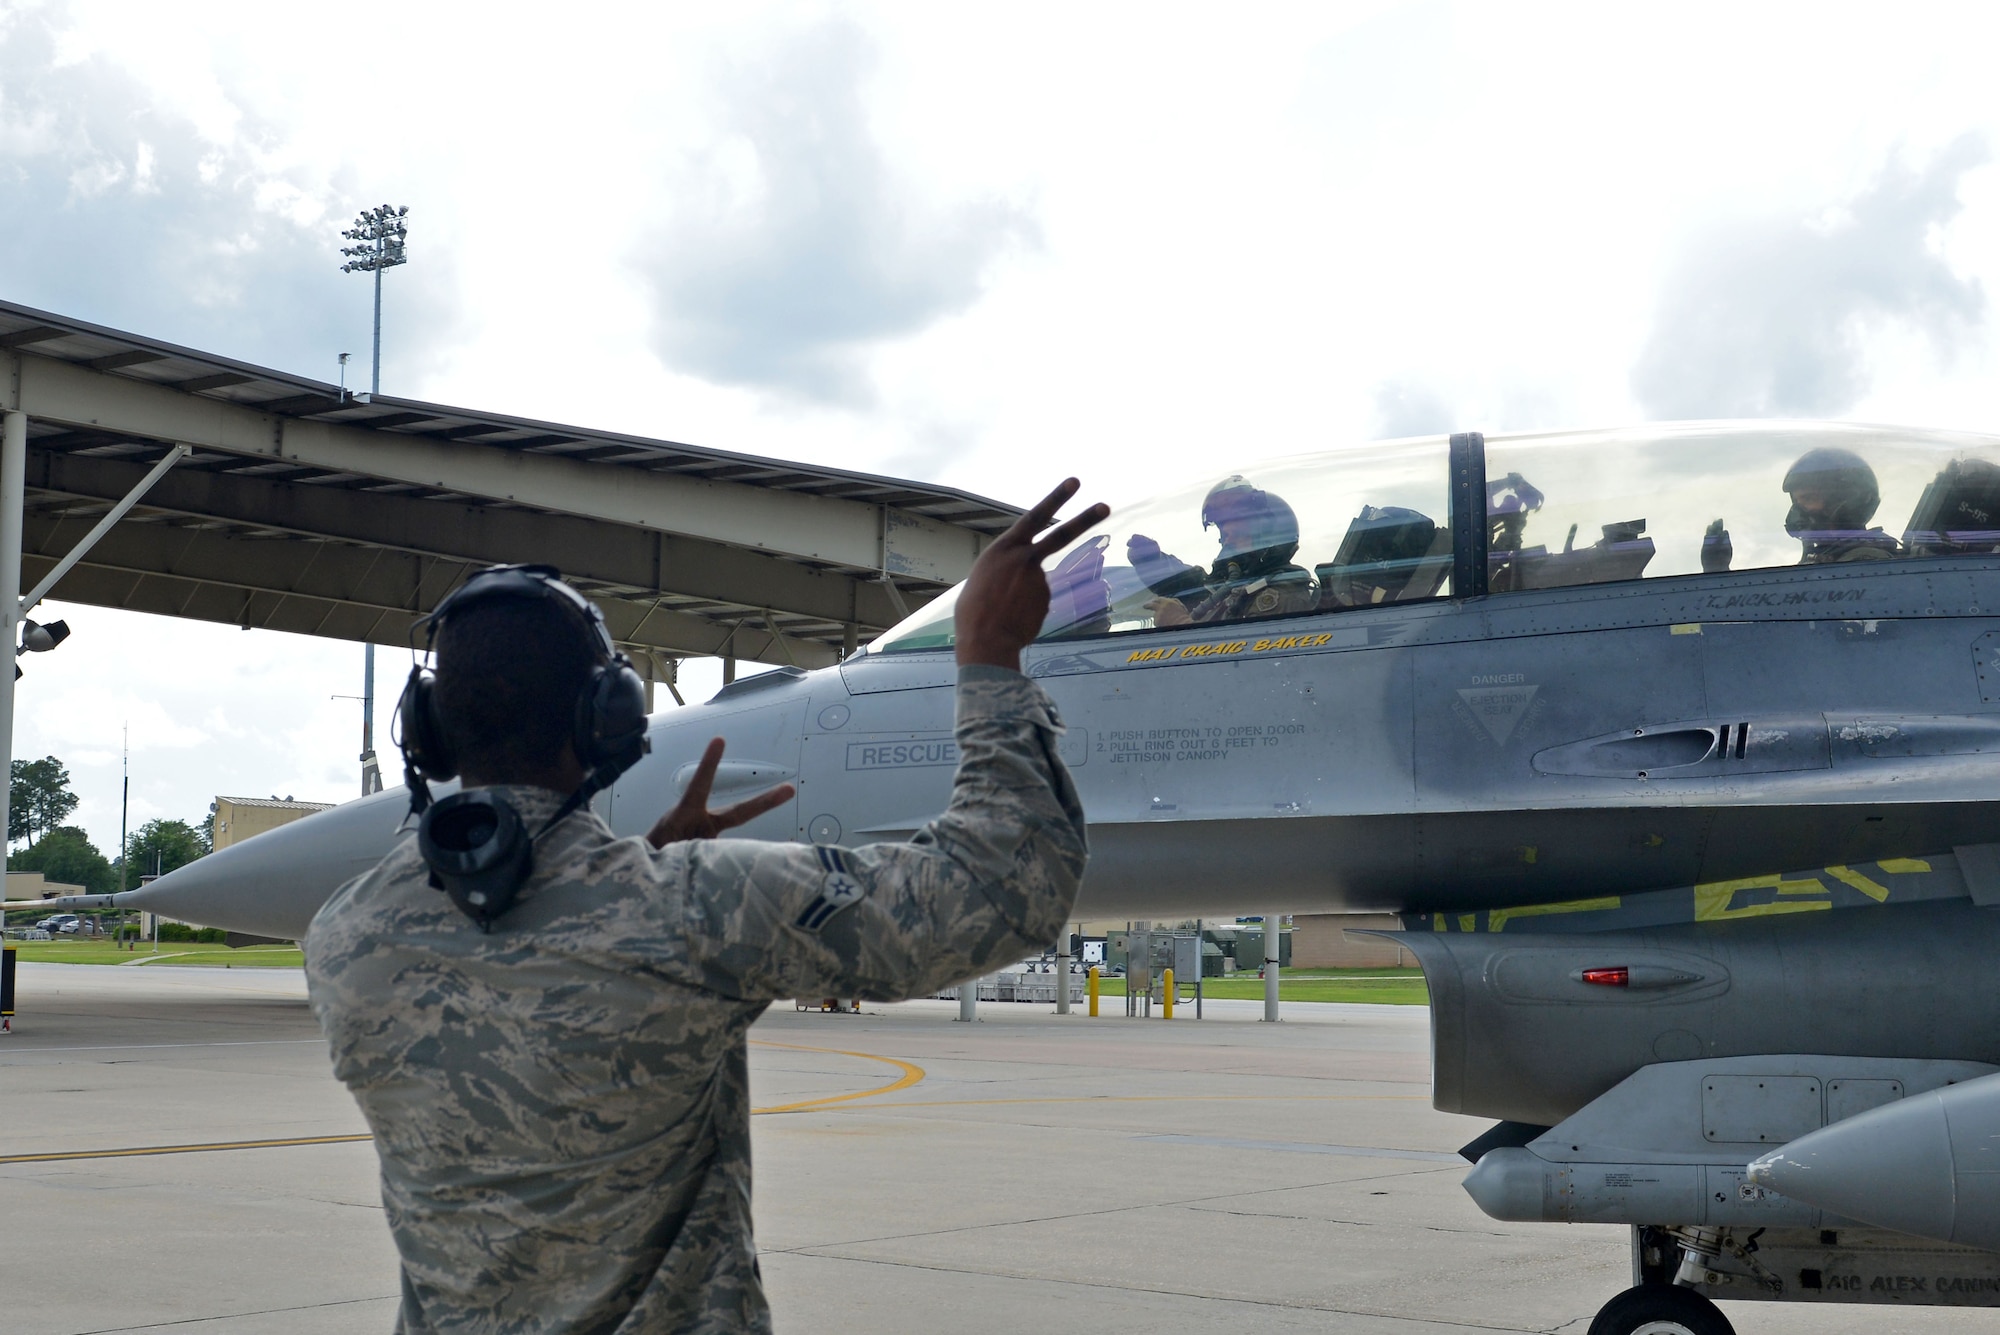 A U.S. Airman marshals out Col. Douglas Thies, 20th Operations Group commander, and Col. David Vaclavik, 20th Mission Support Group commander, in an F-16D Fighting Falcon at Shaw Air Force Base, S.C., May 30, 2017. Shaw marked the first assignment Thies and Vaclavik have had together since they graduated from the Texas A&M University Cadet Corps. (U.S. Air Force photo by Airman 1st Class Destinee Sweeney)